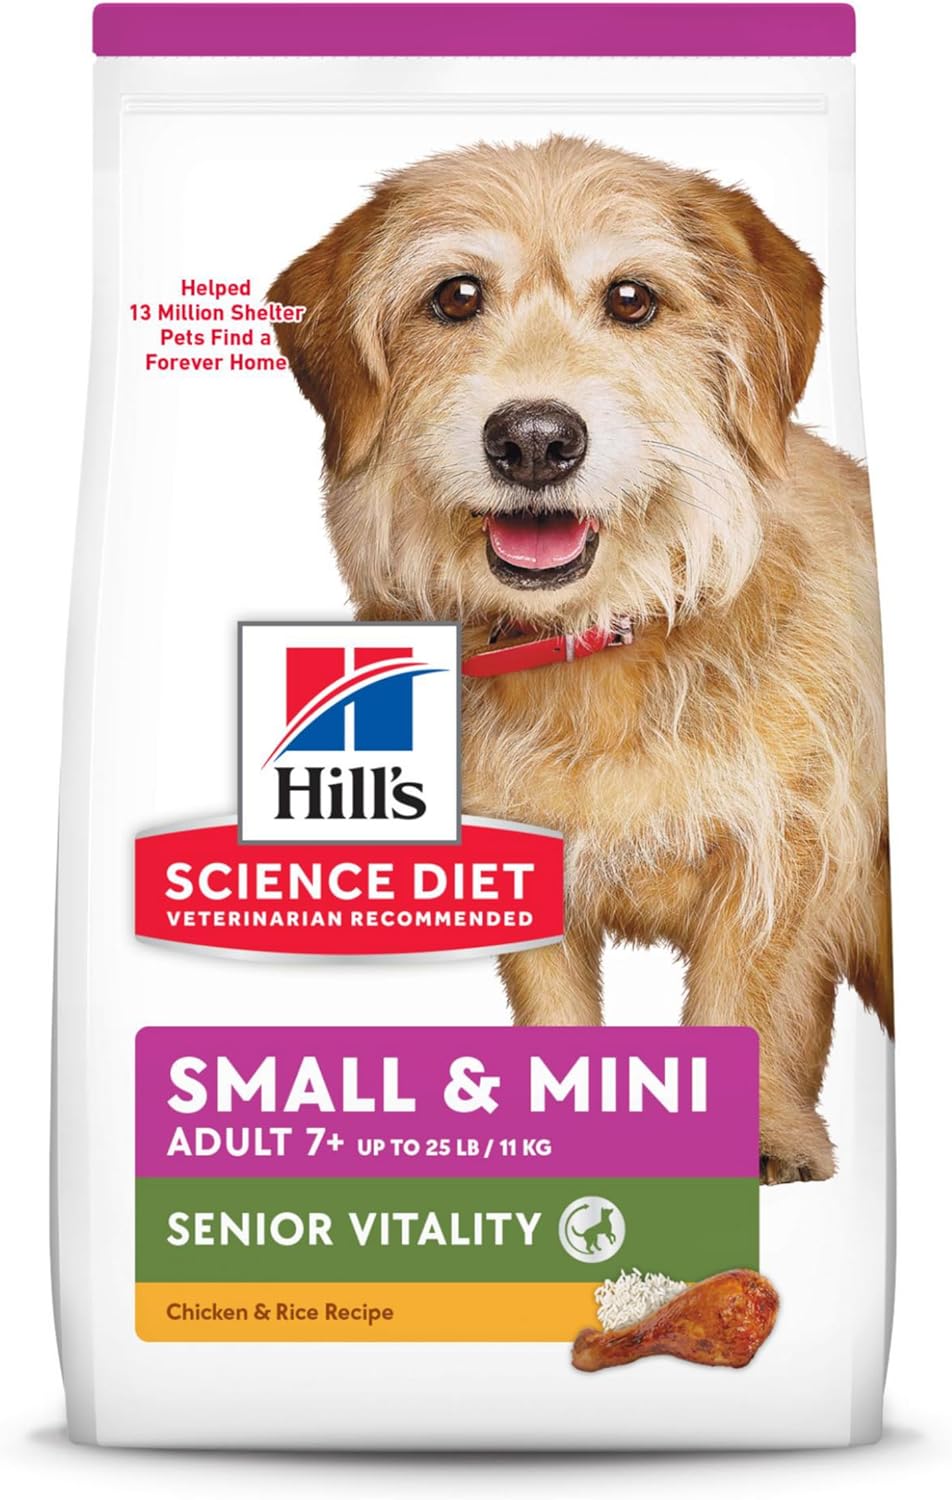 Hill’s Science Diet Adult 7+ Senior Vitality Small & Mini Chicken & Rice Recipe Dry Dog Food – Gallery Image 1